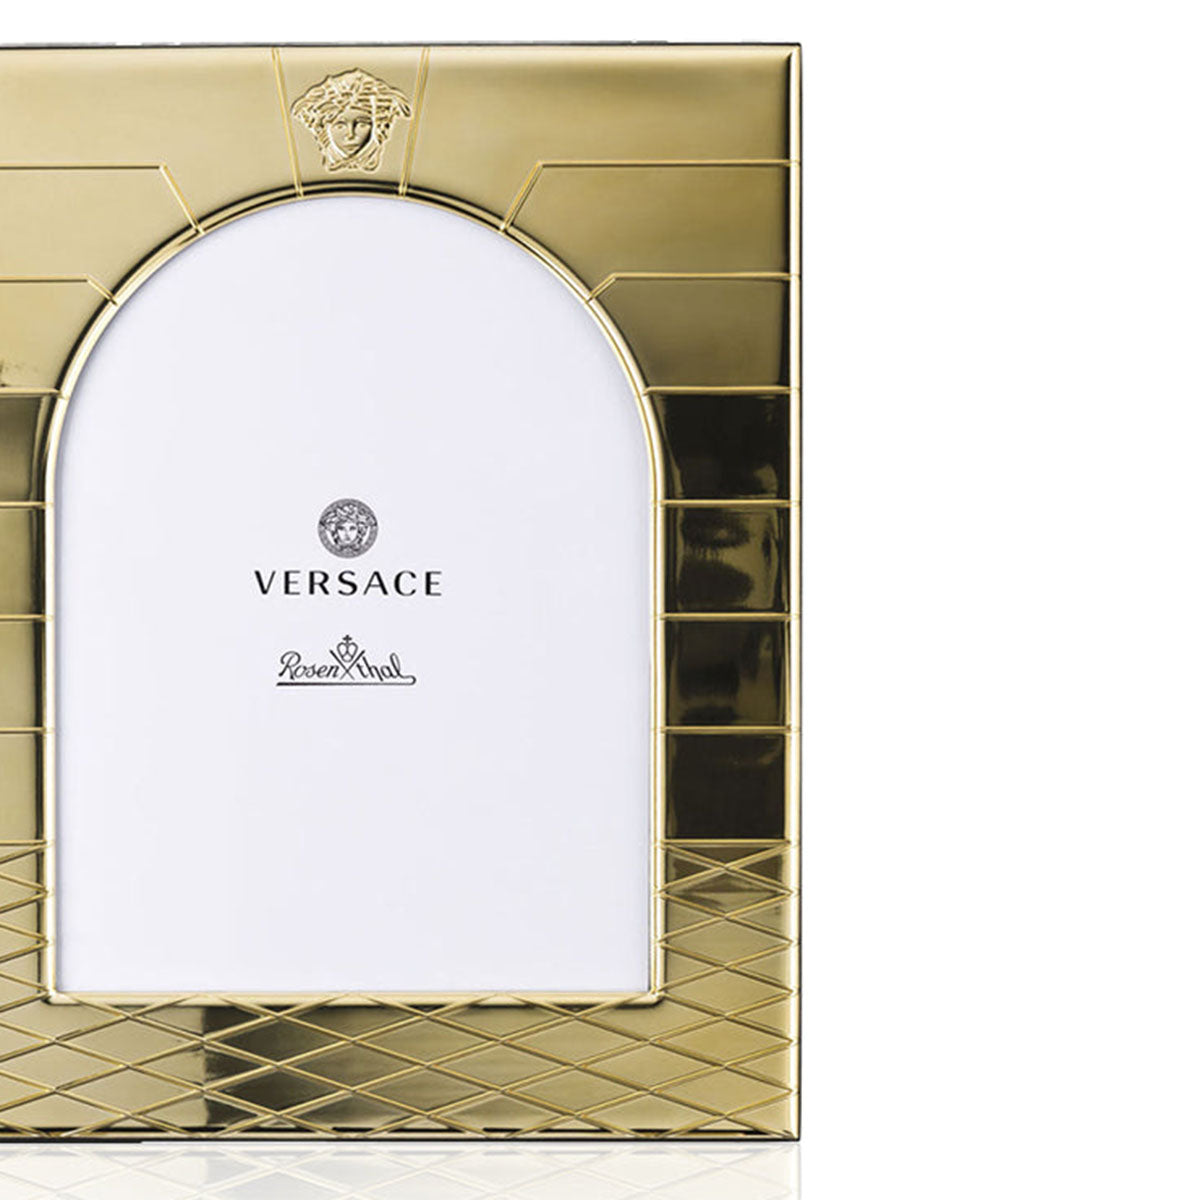 Versace Vhf5 Gold Picture Frame